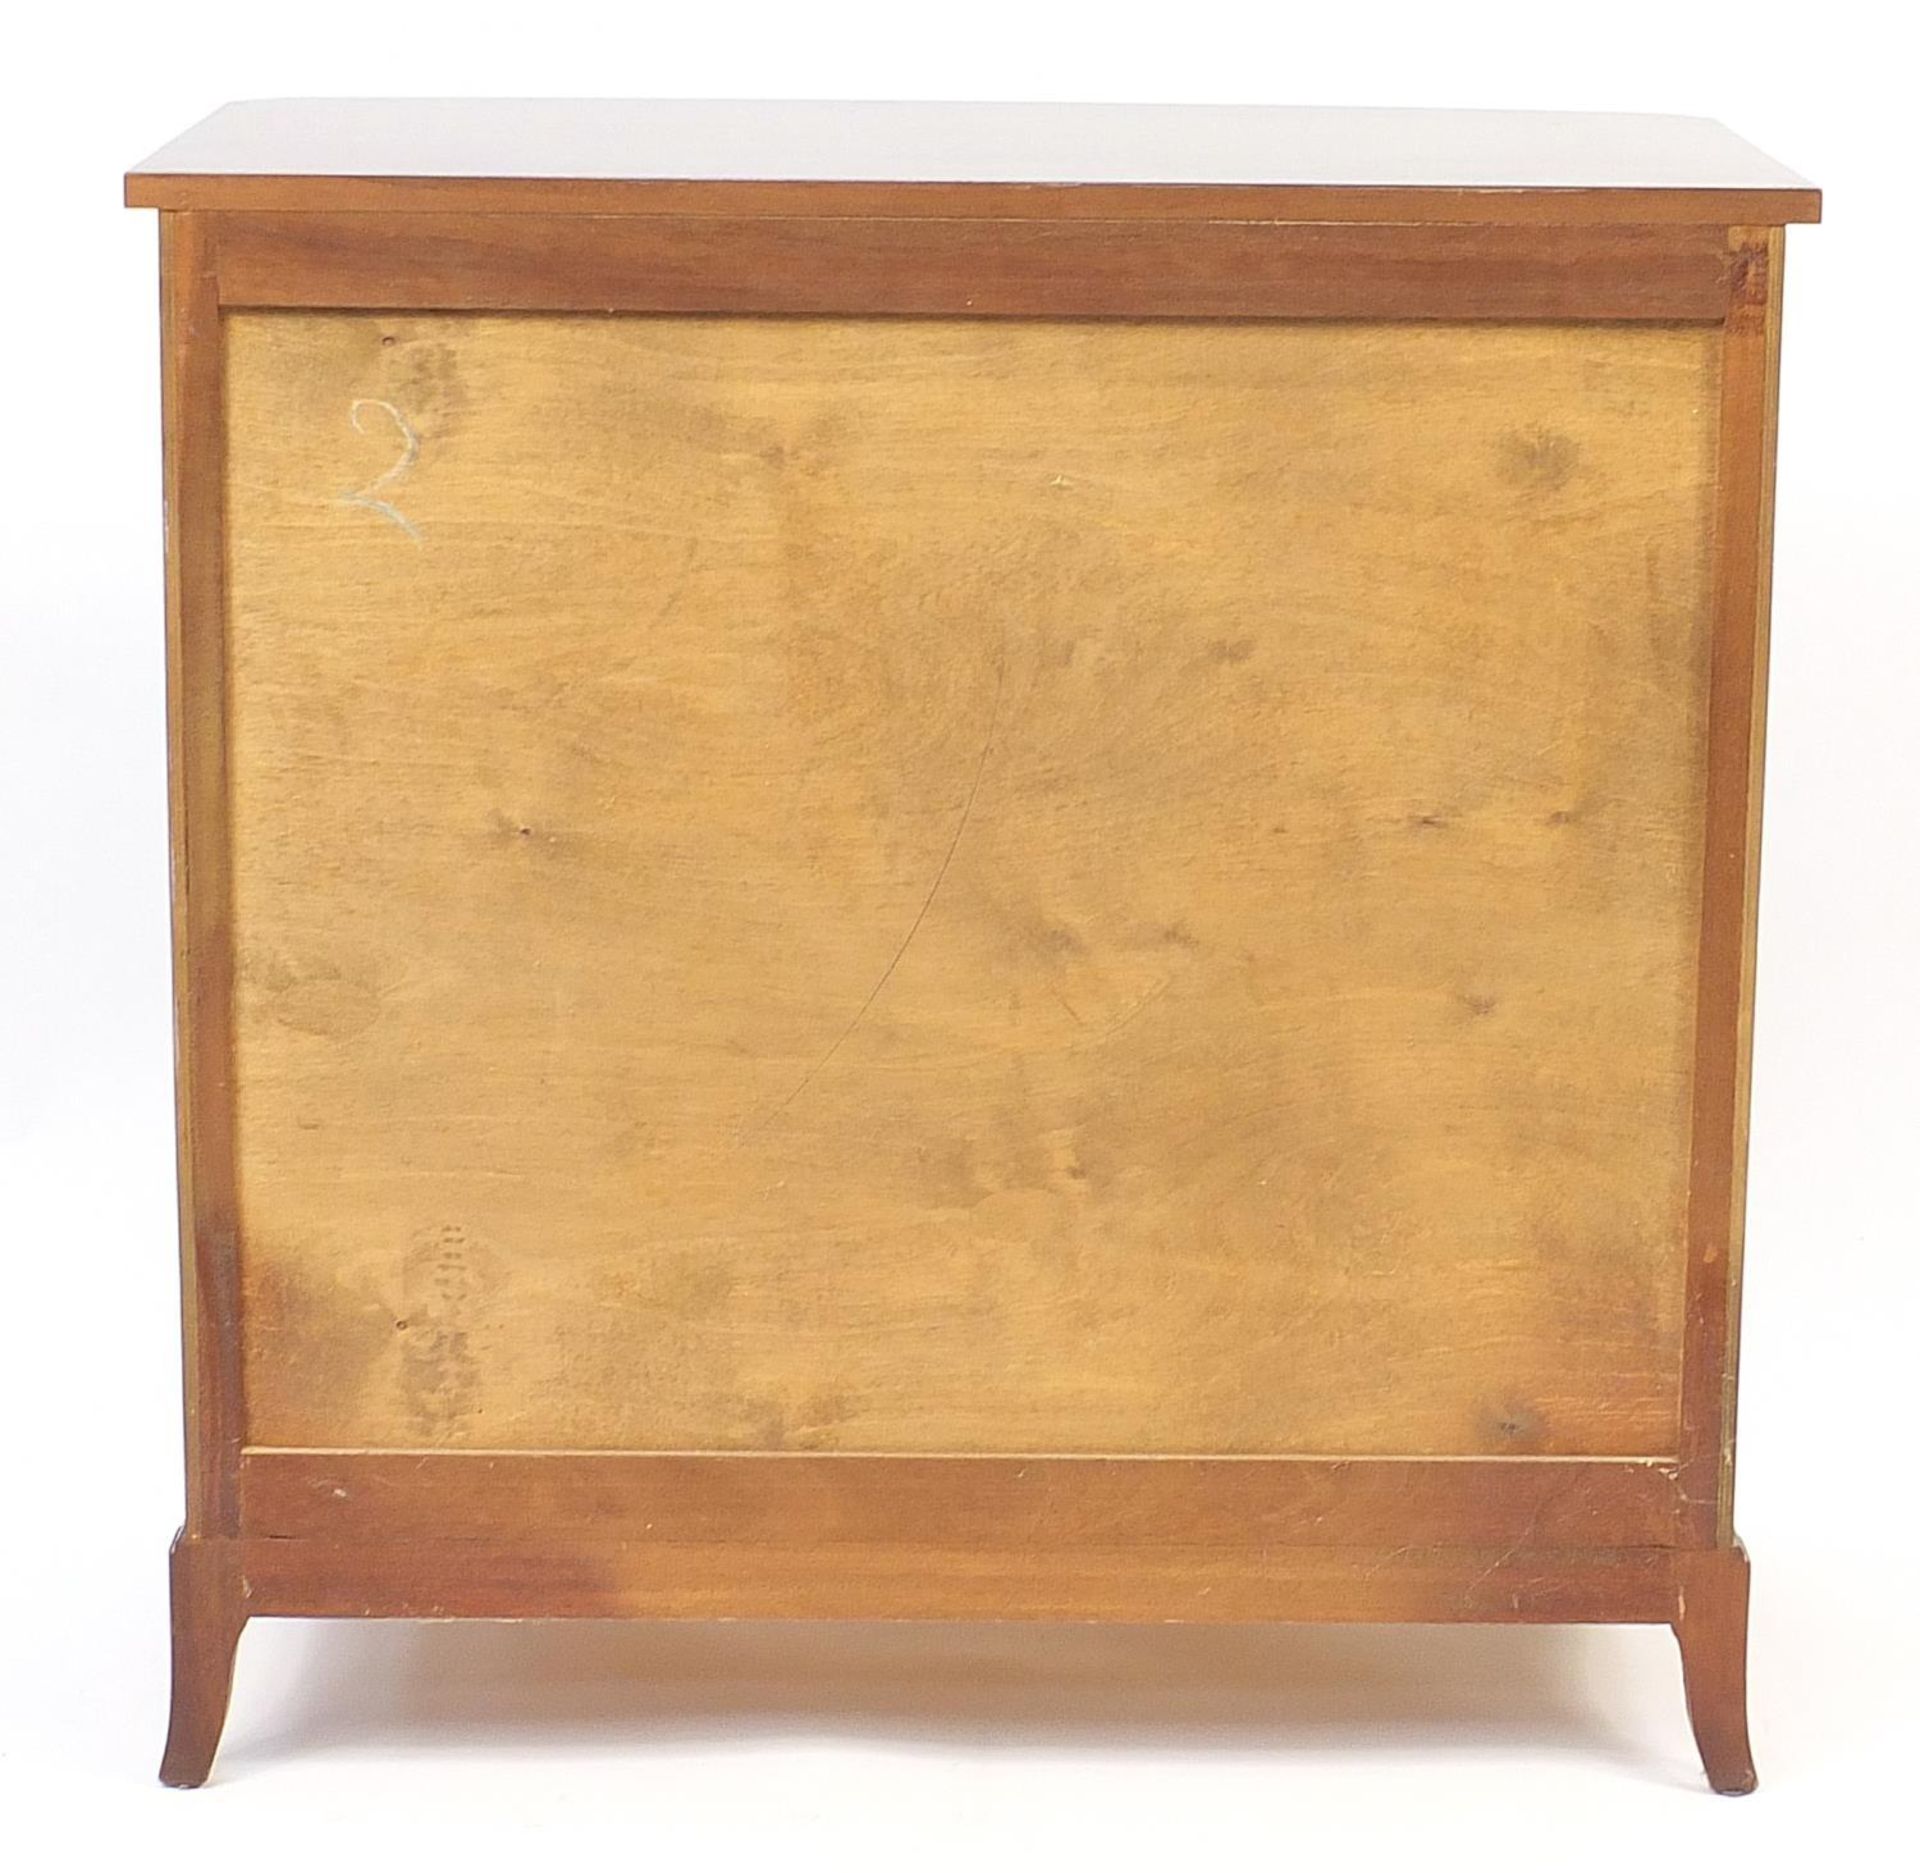 Strongbow mahogany bow fronted chest of drawers with ring handles, 93cm H x 91cm W x 48cm D - Image 4 of 4